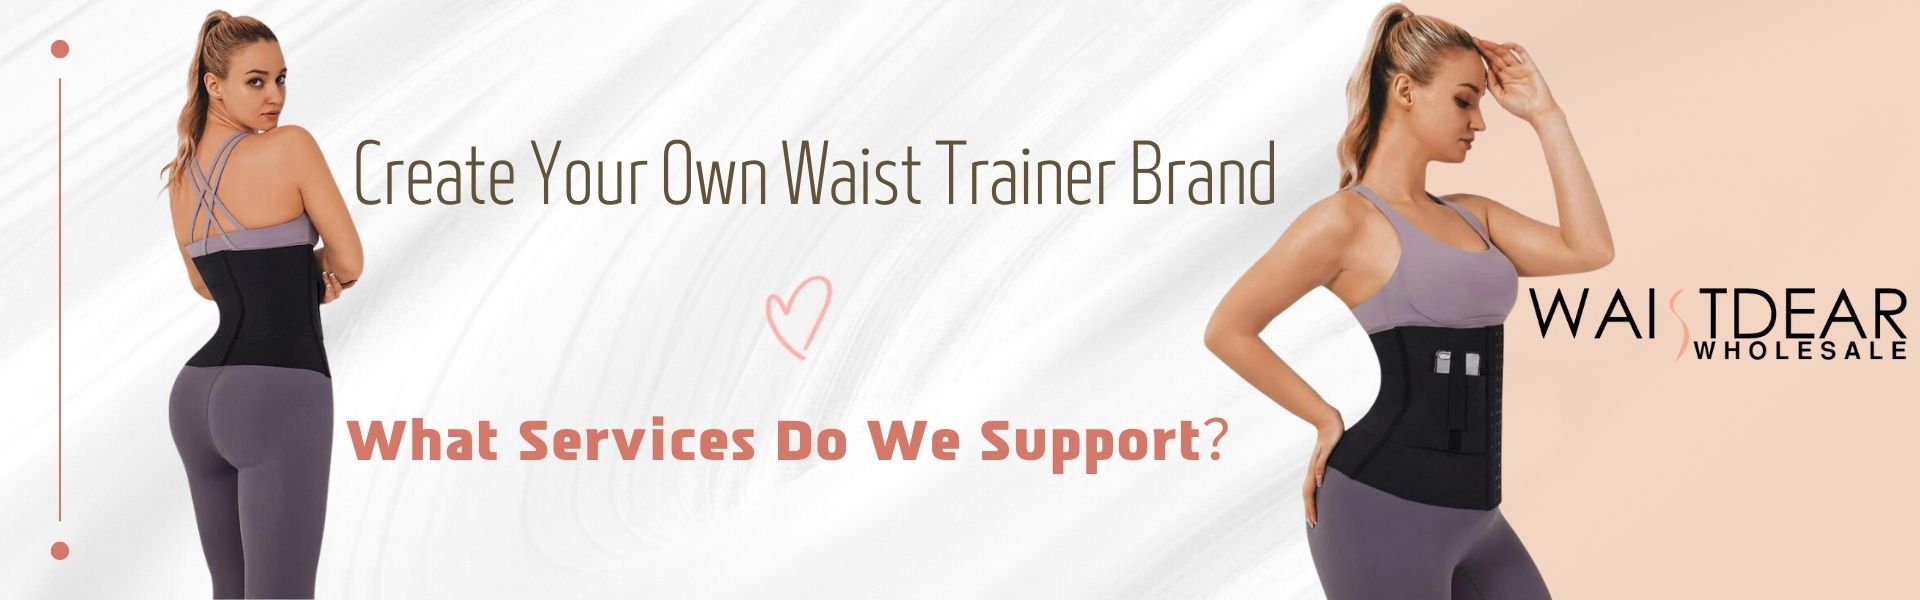 Why Choose WaistDear Waist Trainers? What Services Do They Support